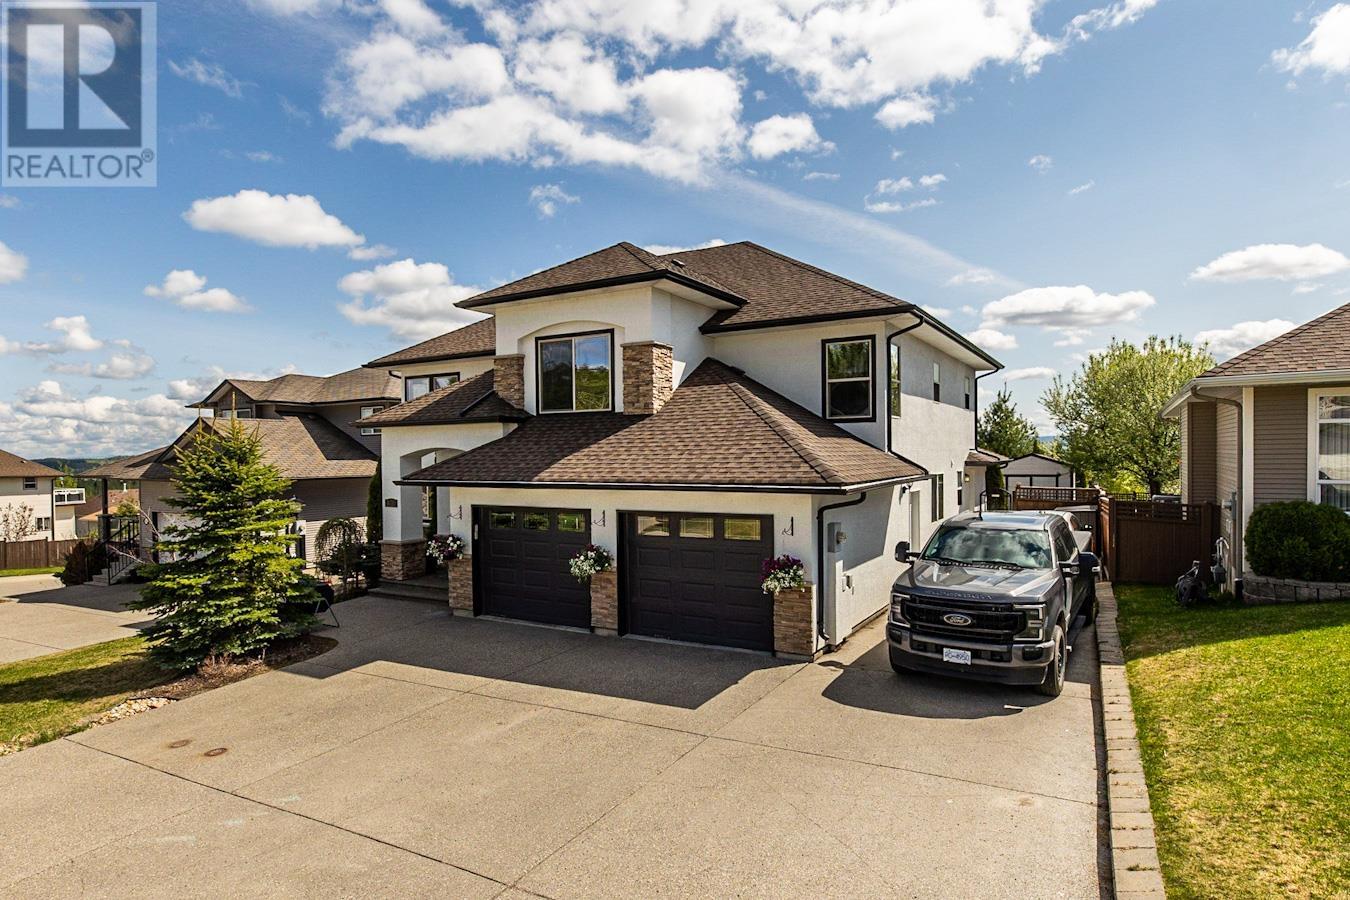 7650 GRAYSHELL ROAD located in Prince George, British Columbia